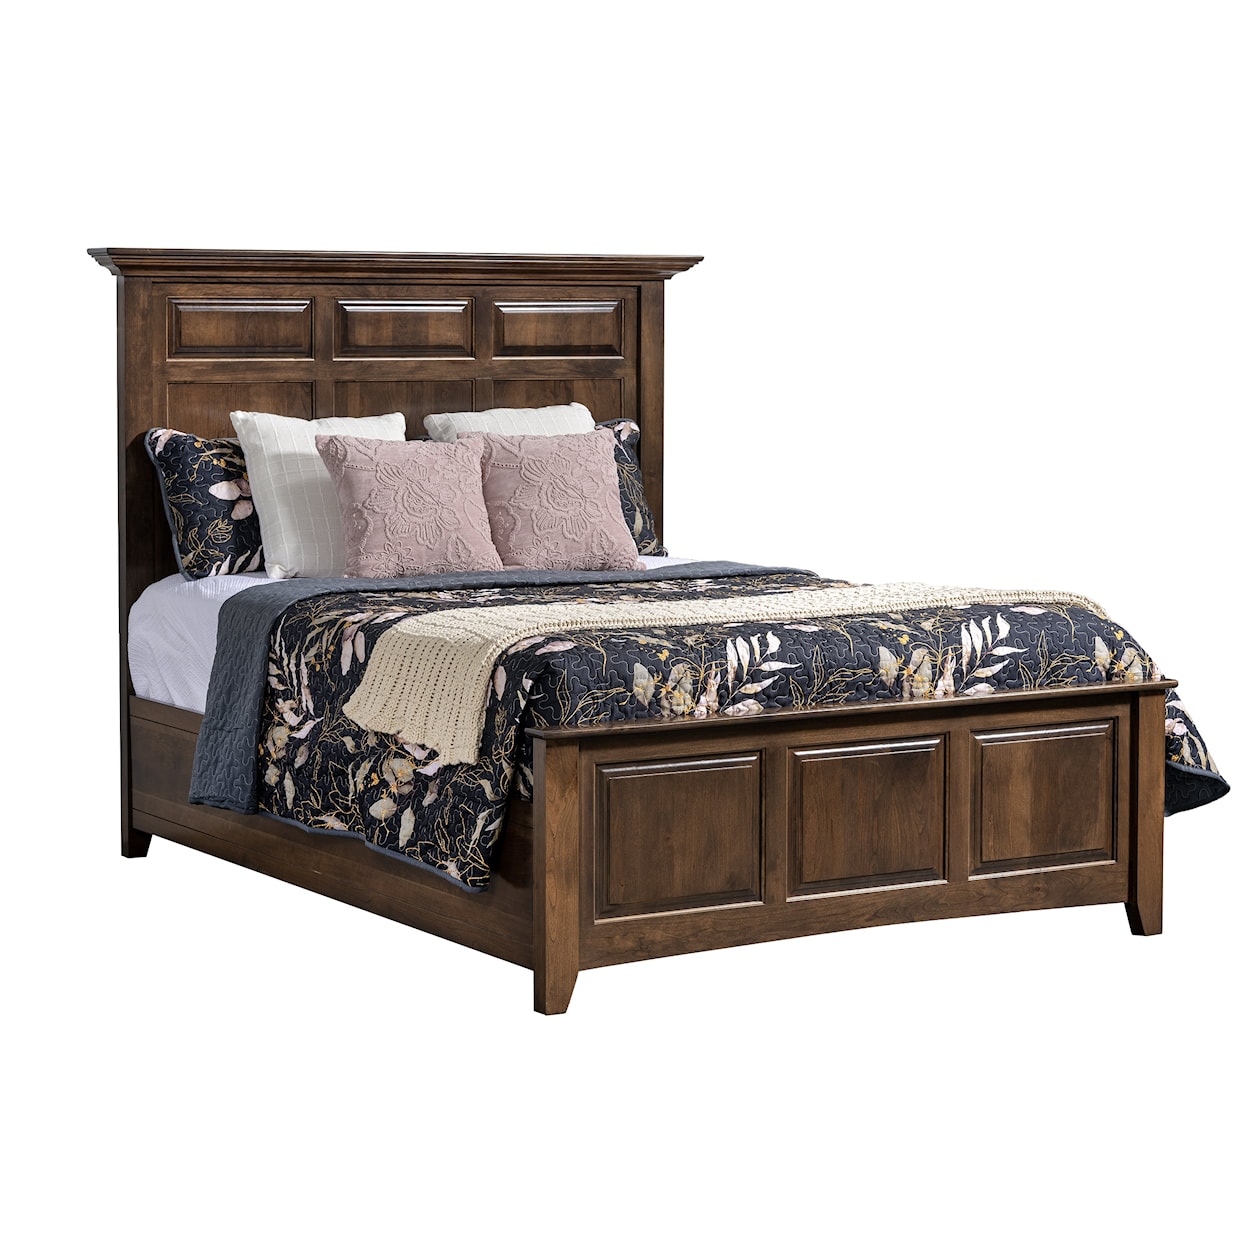 Millcraft Albany King Mantel Panel Bed